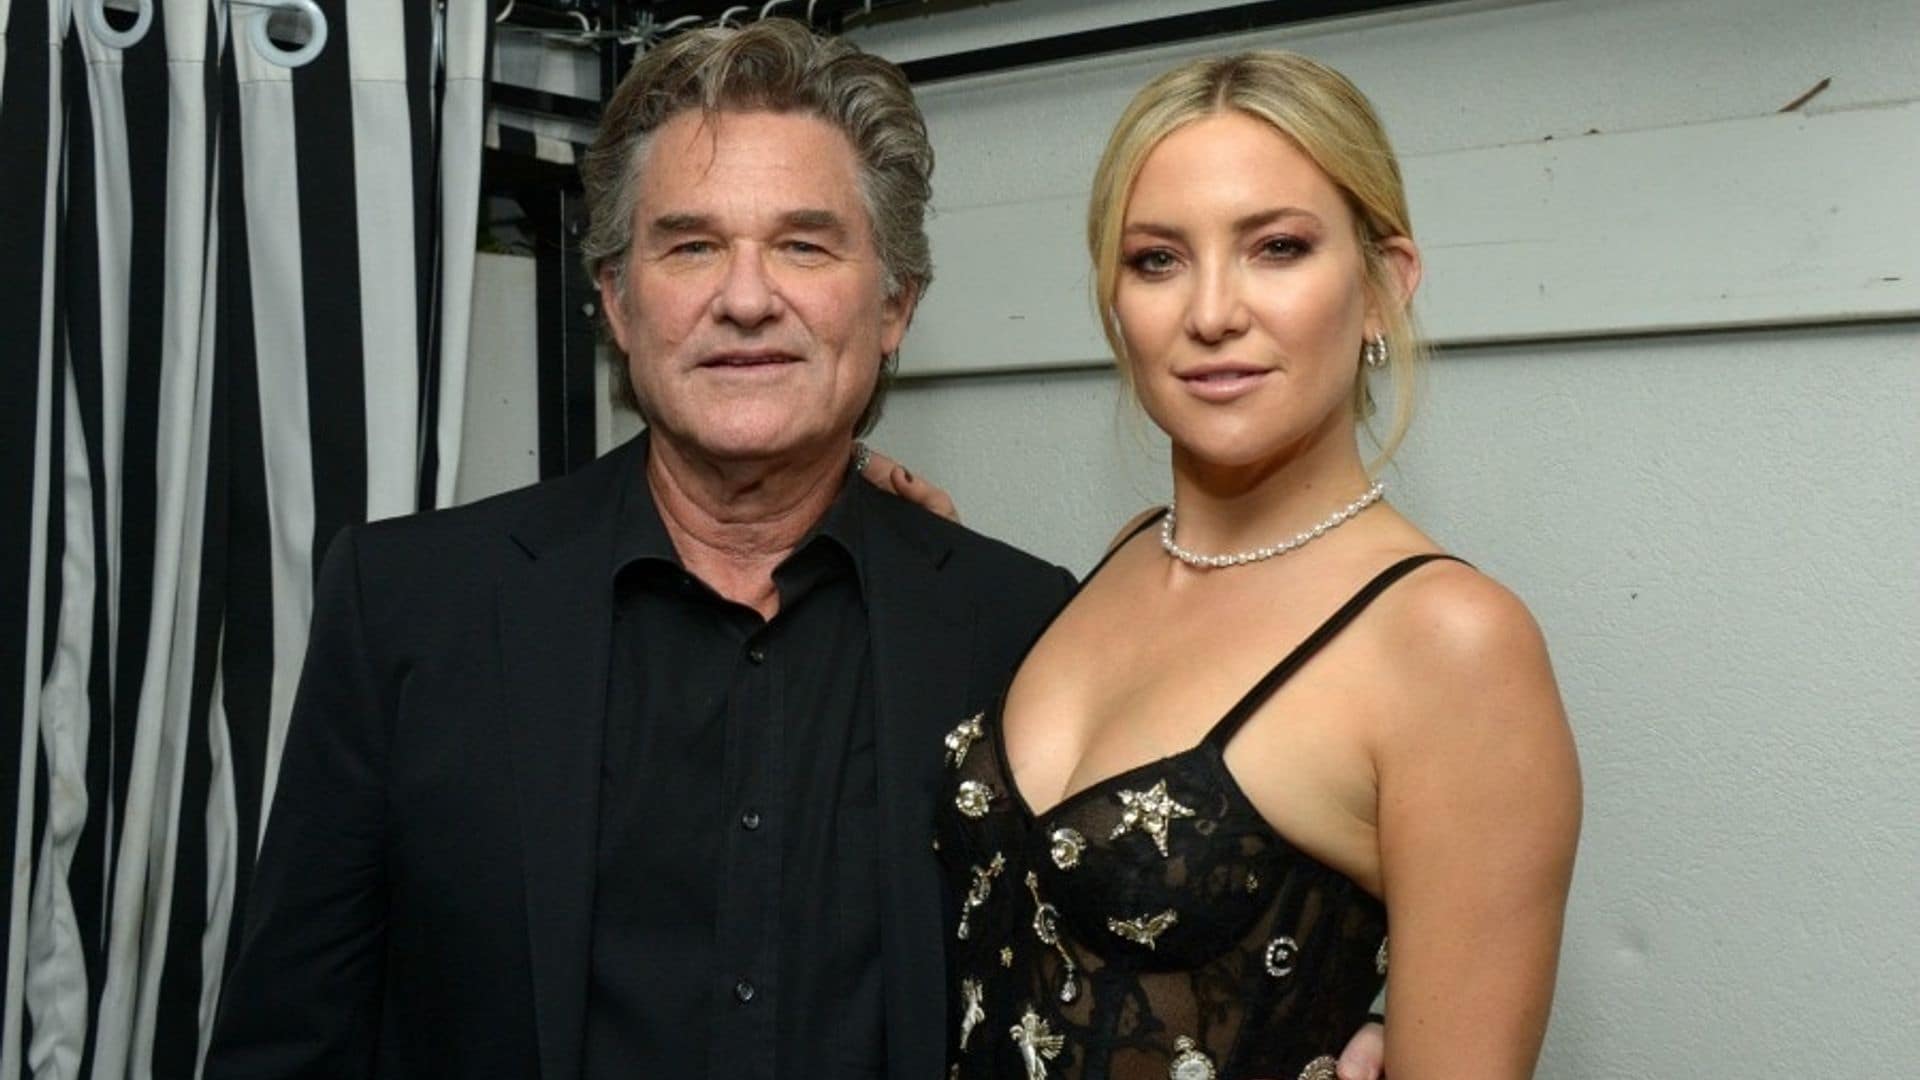 Kate Hudson talks about her 'daredevil' son and what it was like working with Kurt Russell